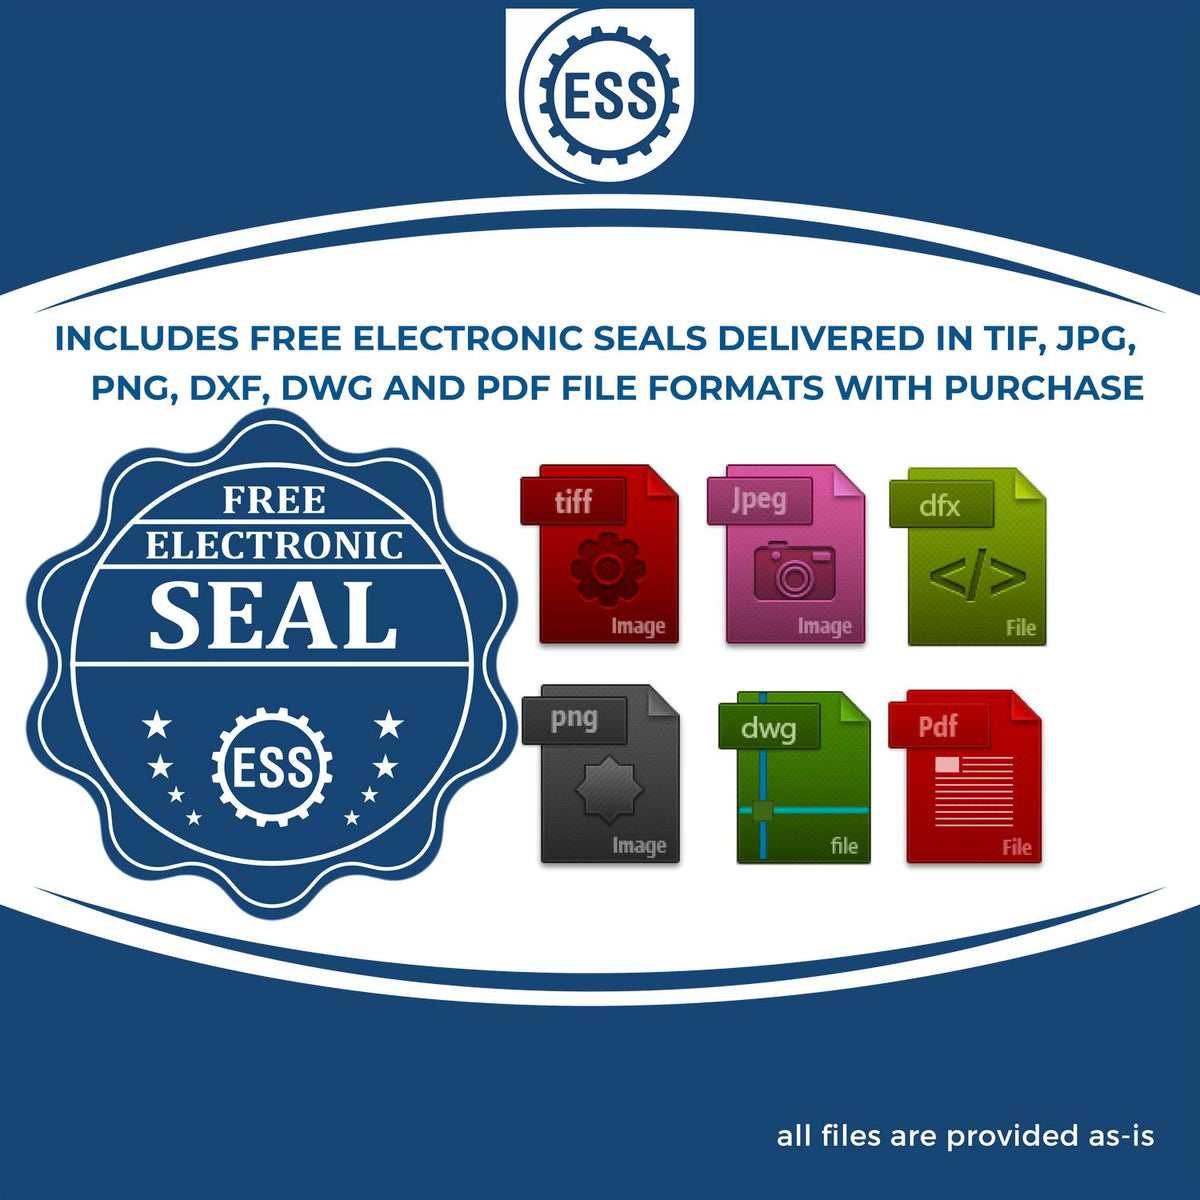 An infographic for the free electronic seal for the Premium MaxLight Pre-Inked New Hampshire Engineering Stamp illustrating the different file type icons such as DXF, DWG, TIF, JPG and PNG.